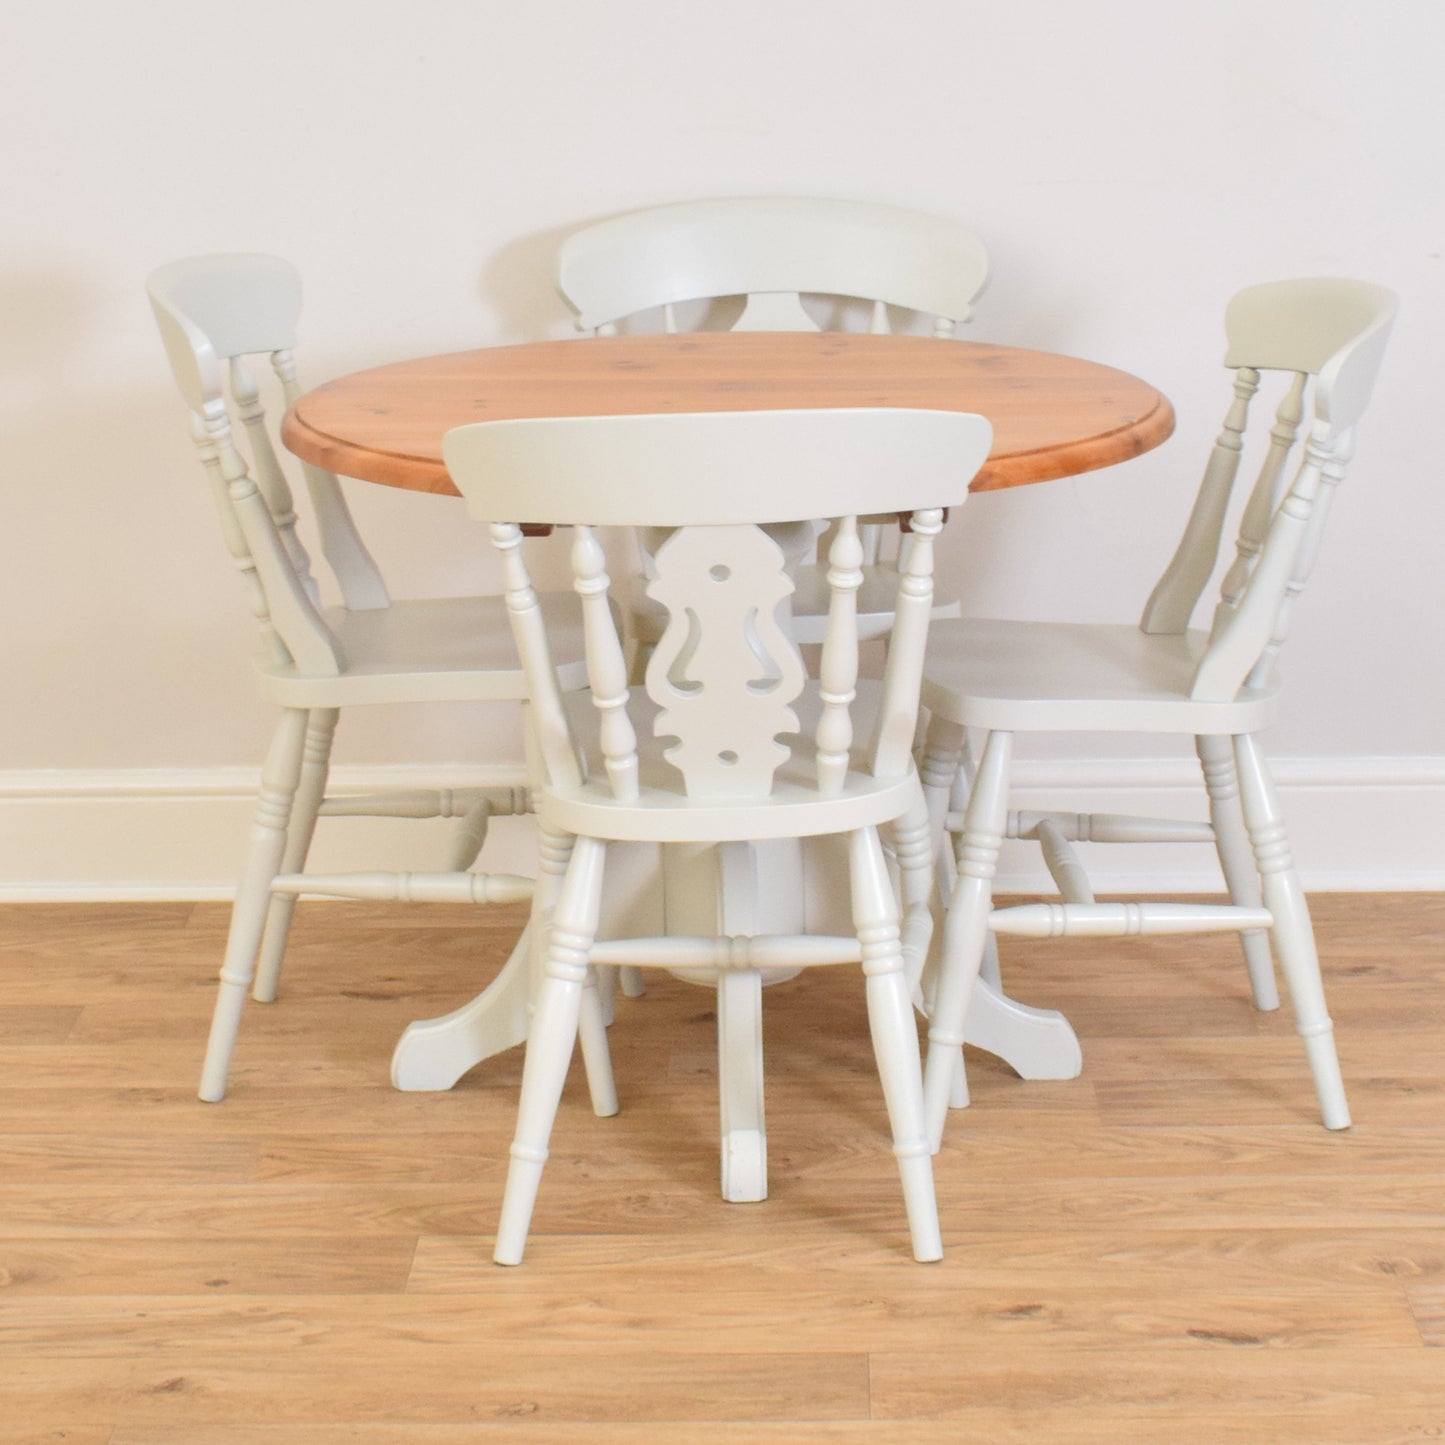 Painted Pine Table and Four Chairs